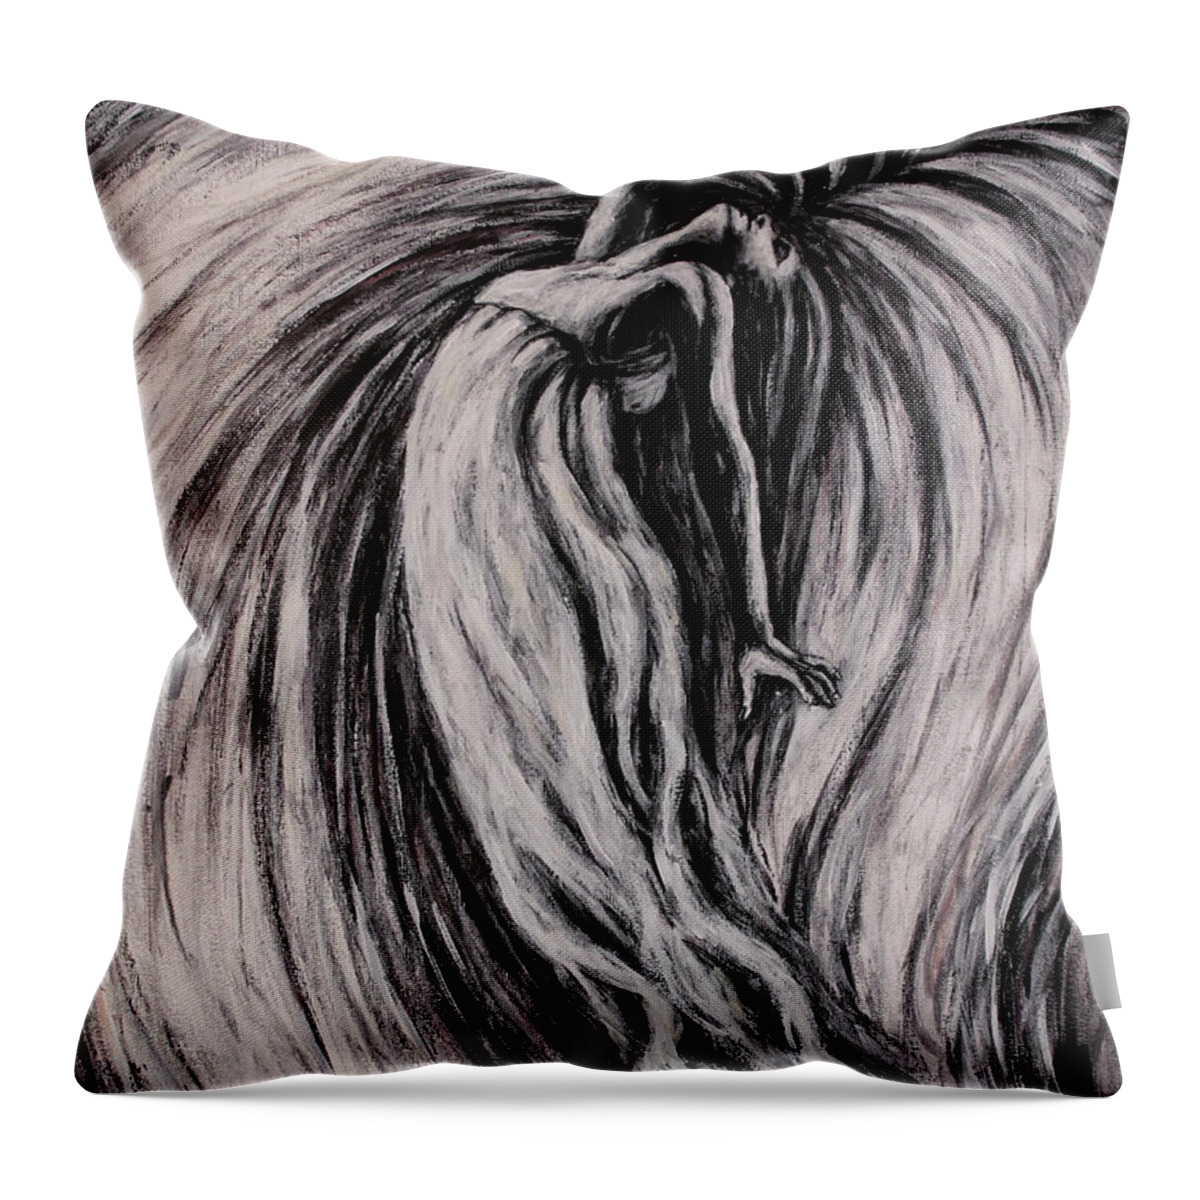 Acrylic Throw Pillow featuring the painting Ascent by Zoe Oakley